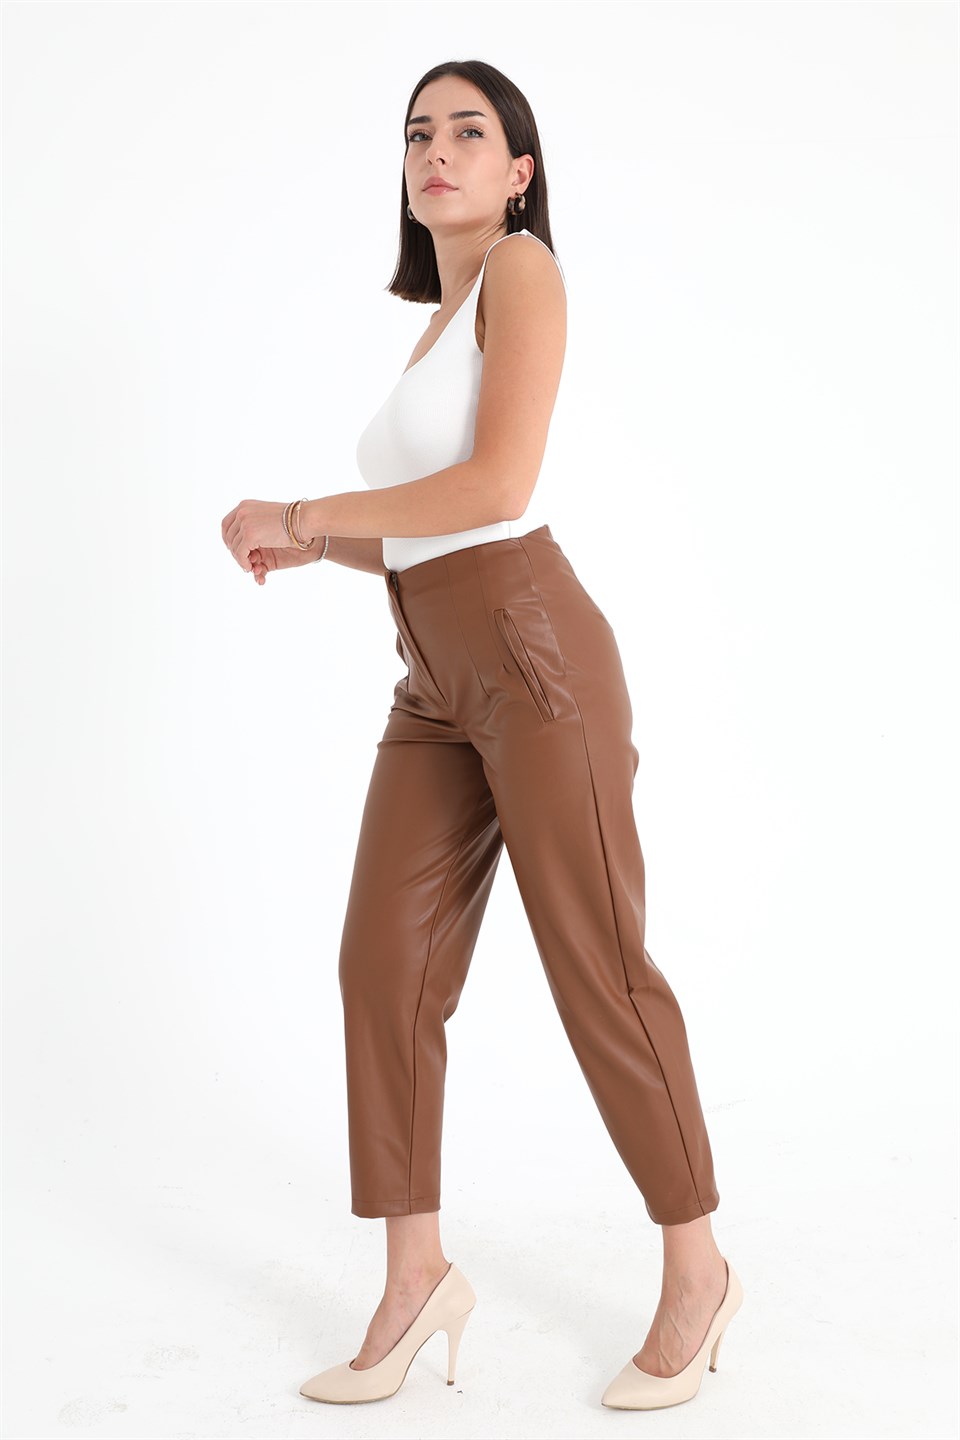 Women's Pleated High Waist Leather Trousers - Tan - STREETMODE™